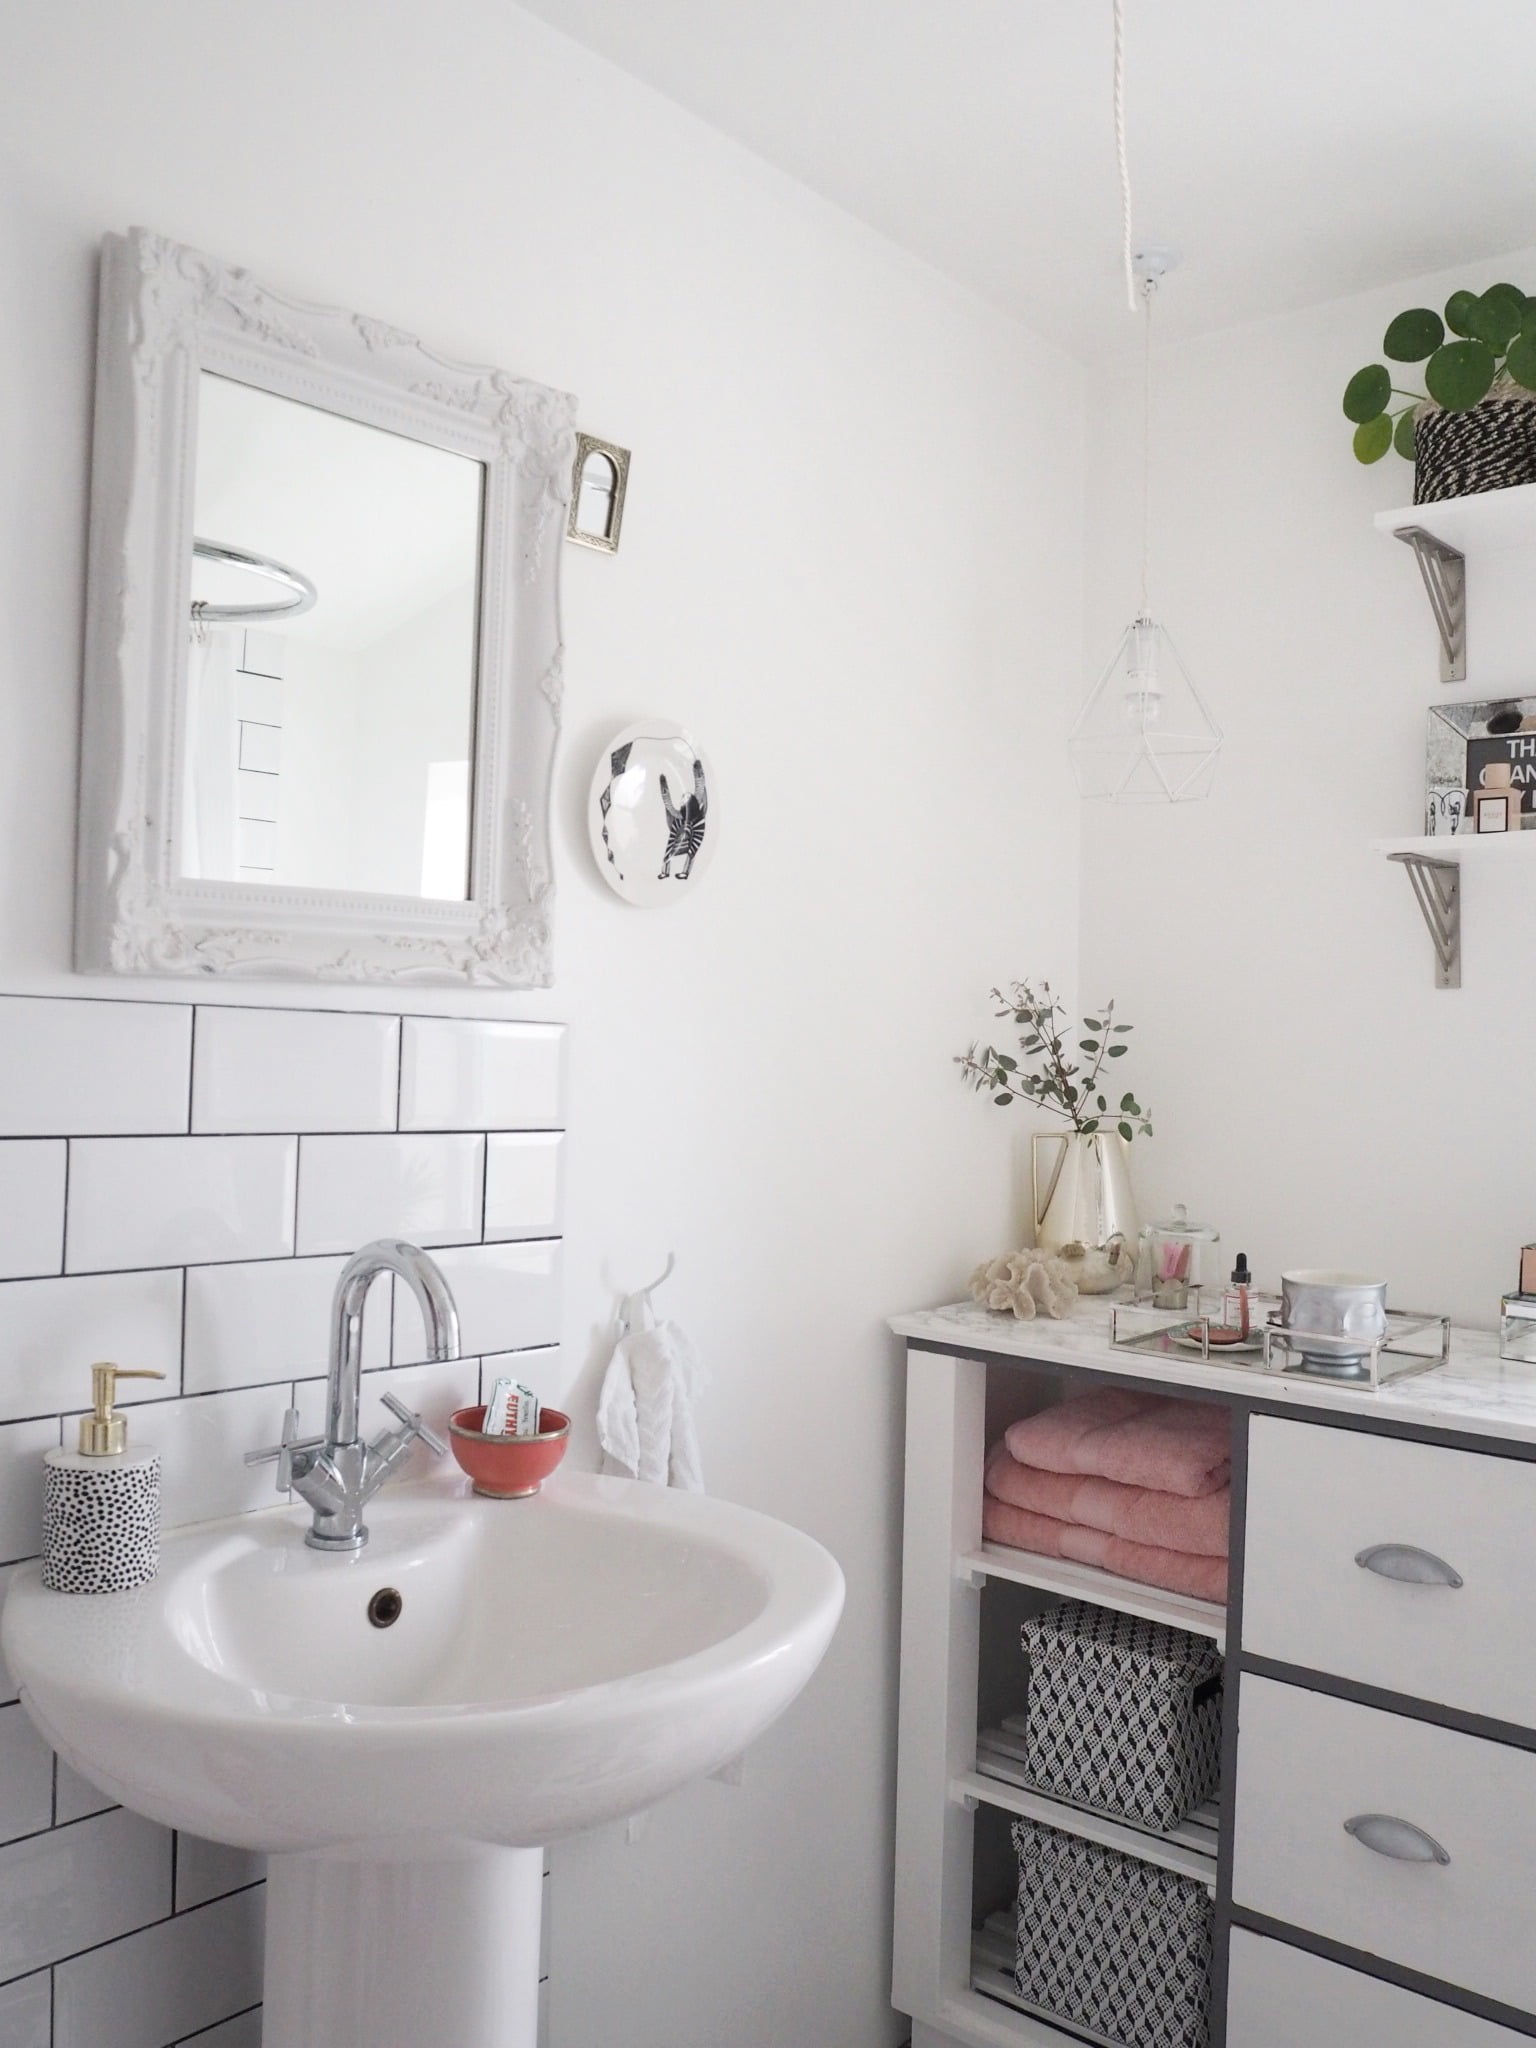 Looking to update your bathroom? Here's my 10 Budget Bathroom Makeover Ideas that won't break the bank by Interior Stylist & Blogger Maxine Brady